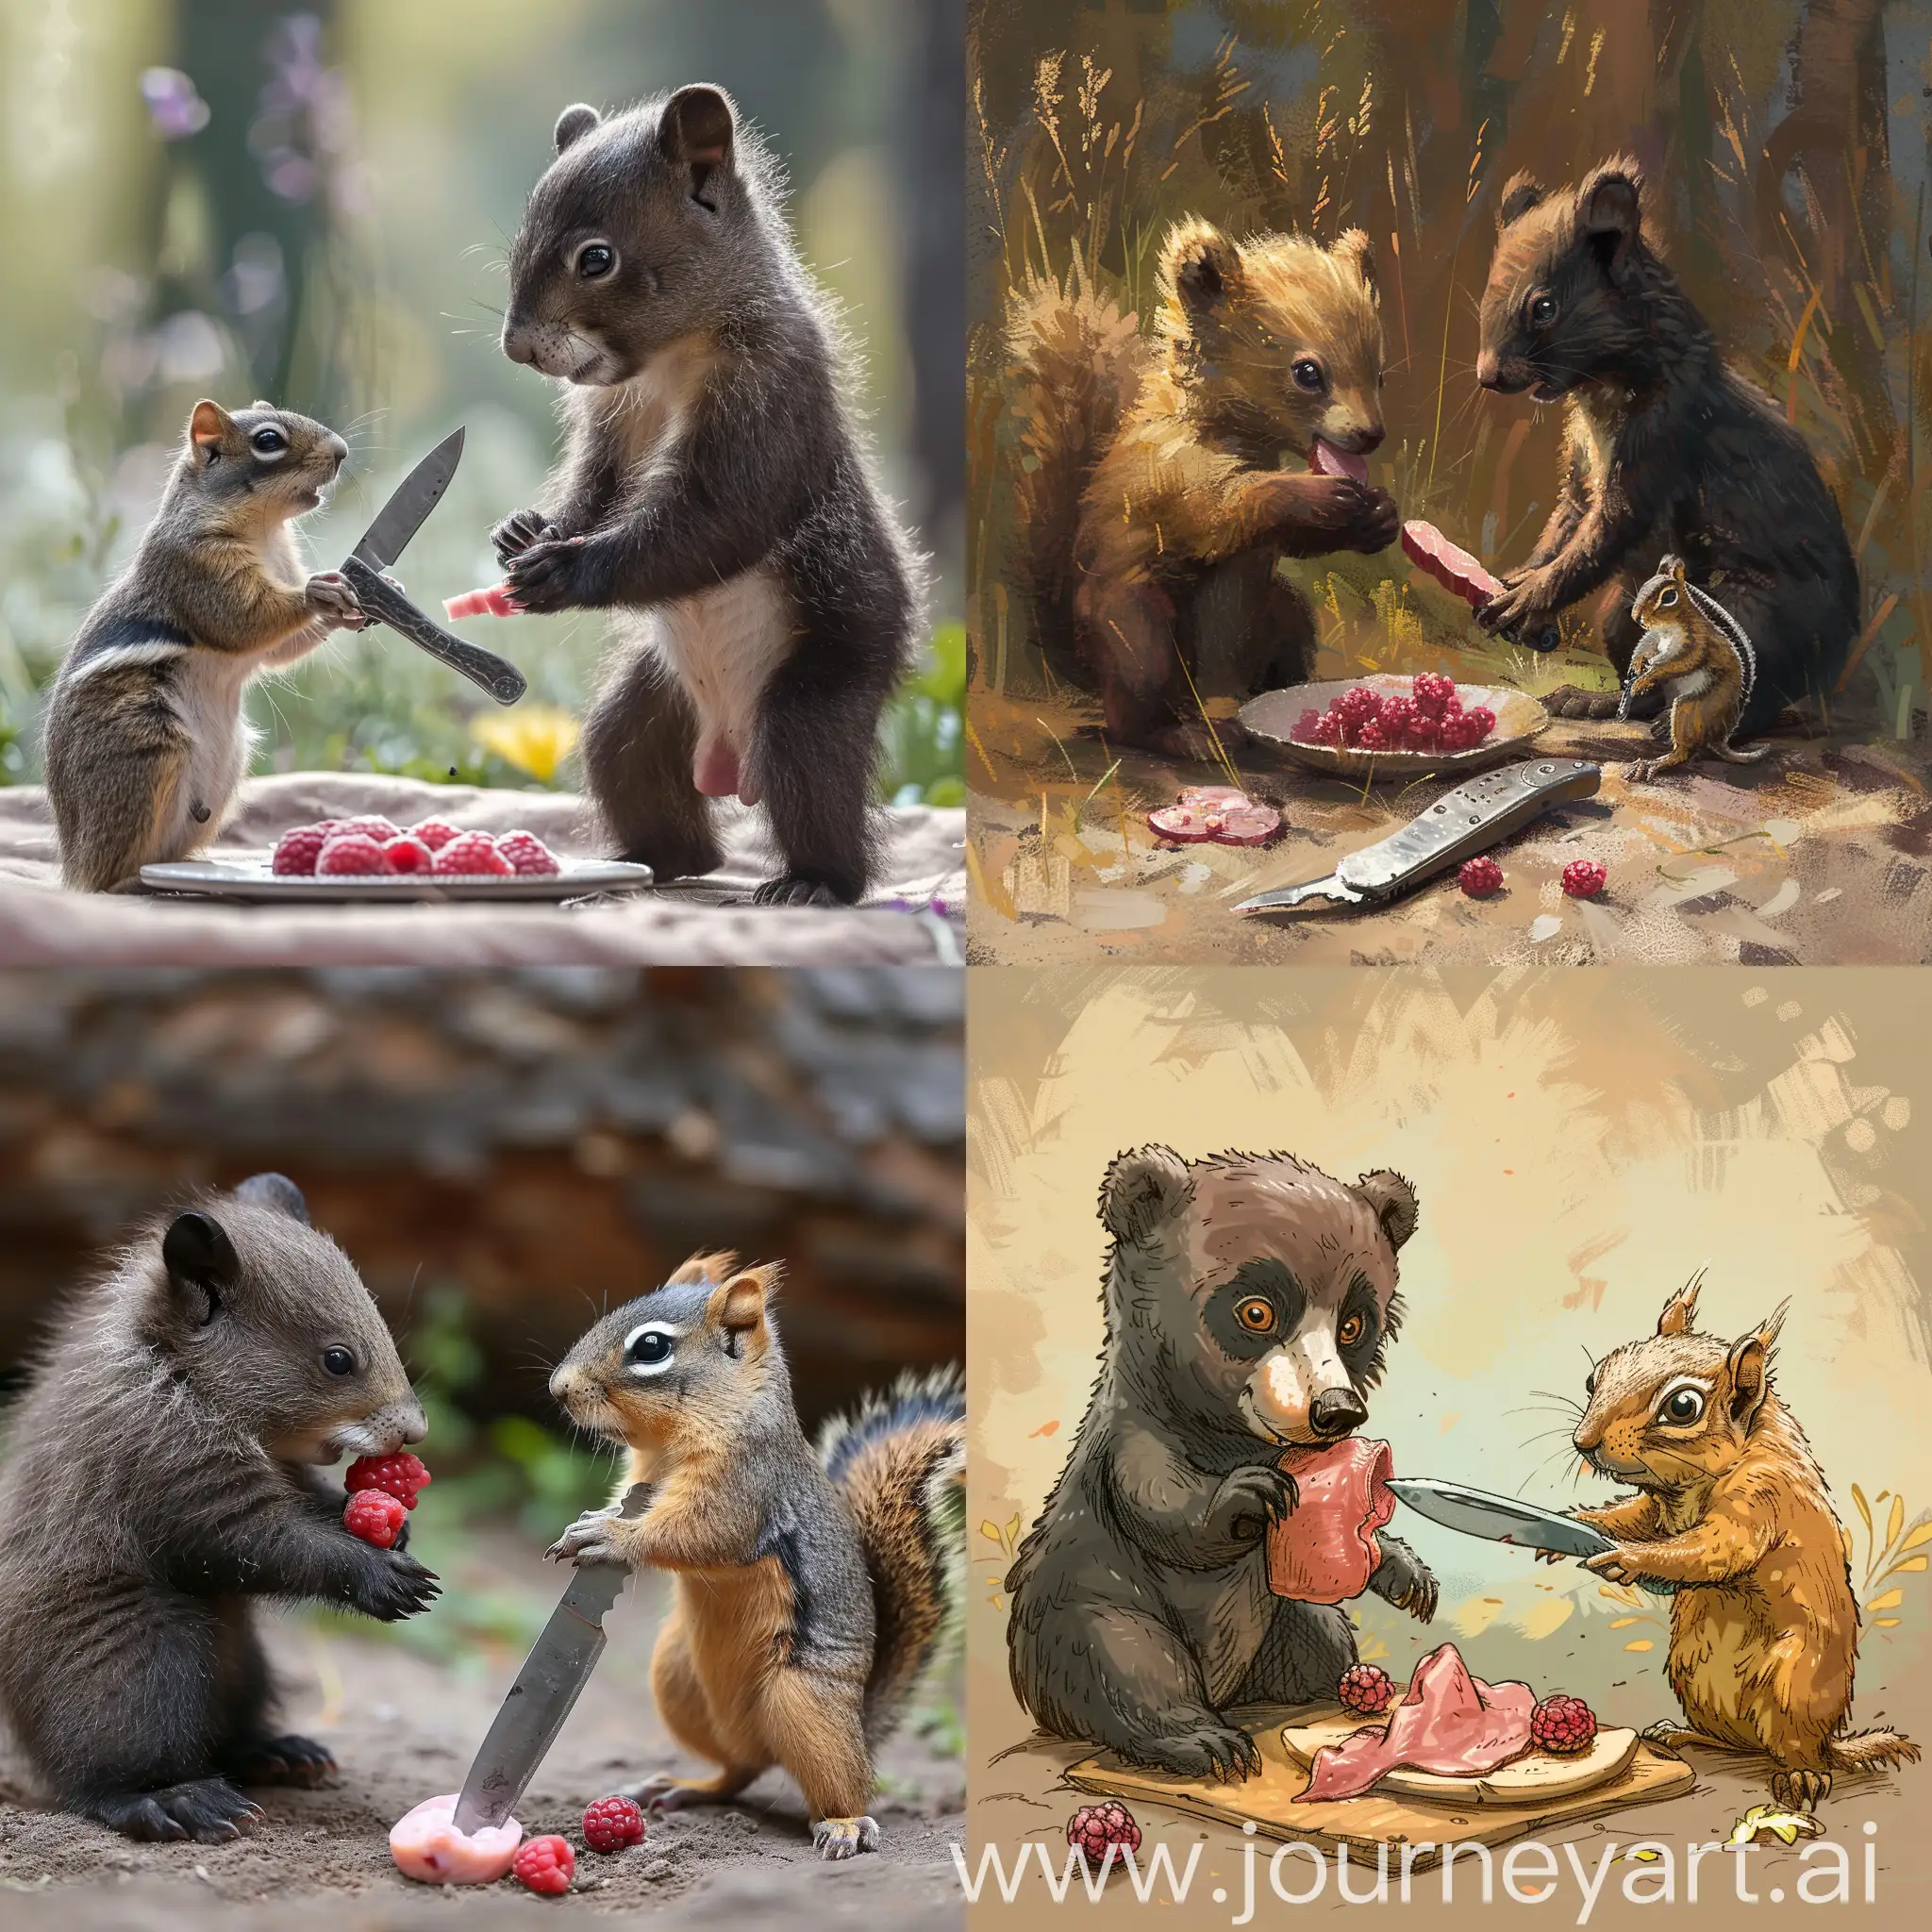 Forest-Feast-Bear-Cub-Enjoying-Ham-with-Raspberry-and-Agile-Ground-Squirrel-with-Stolen-Pocket-Knife